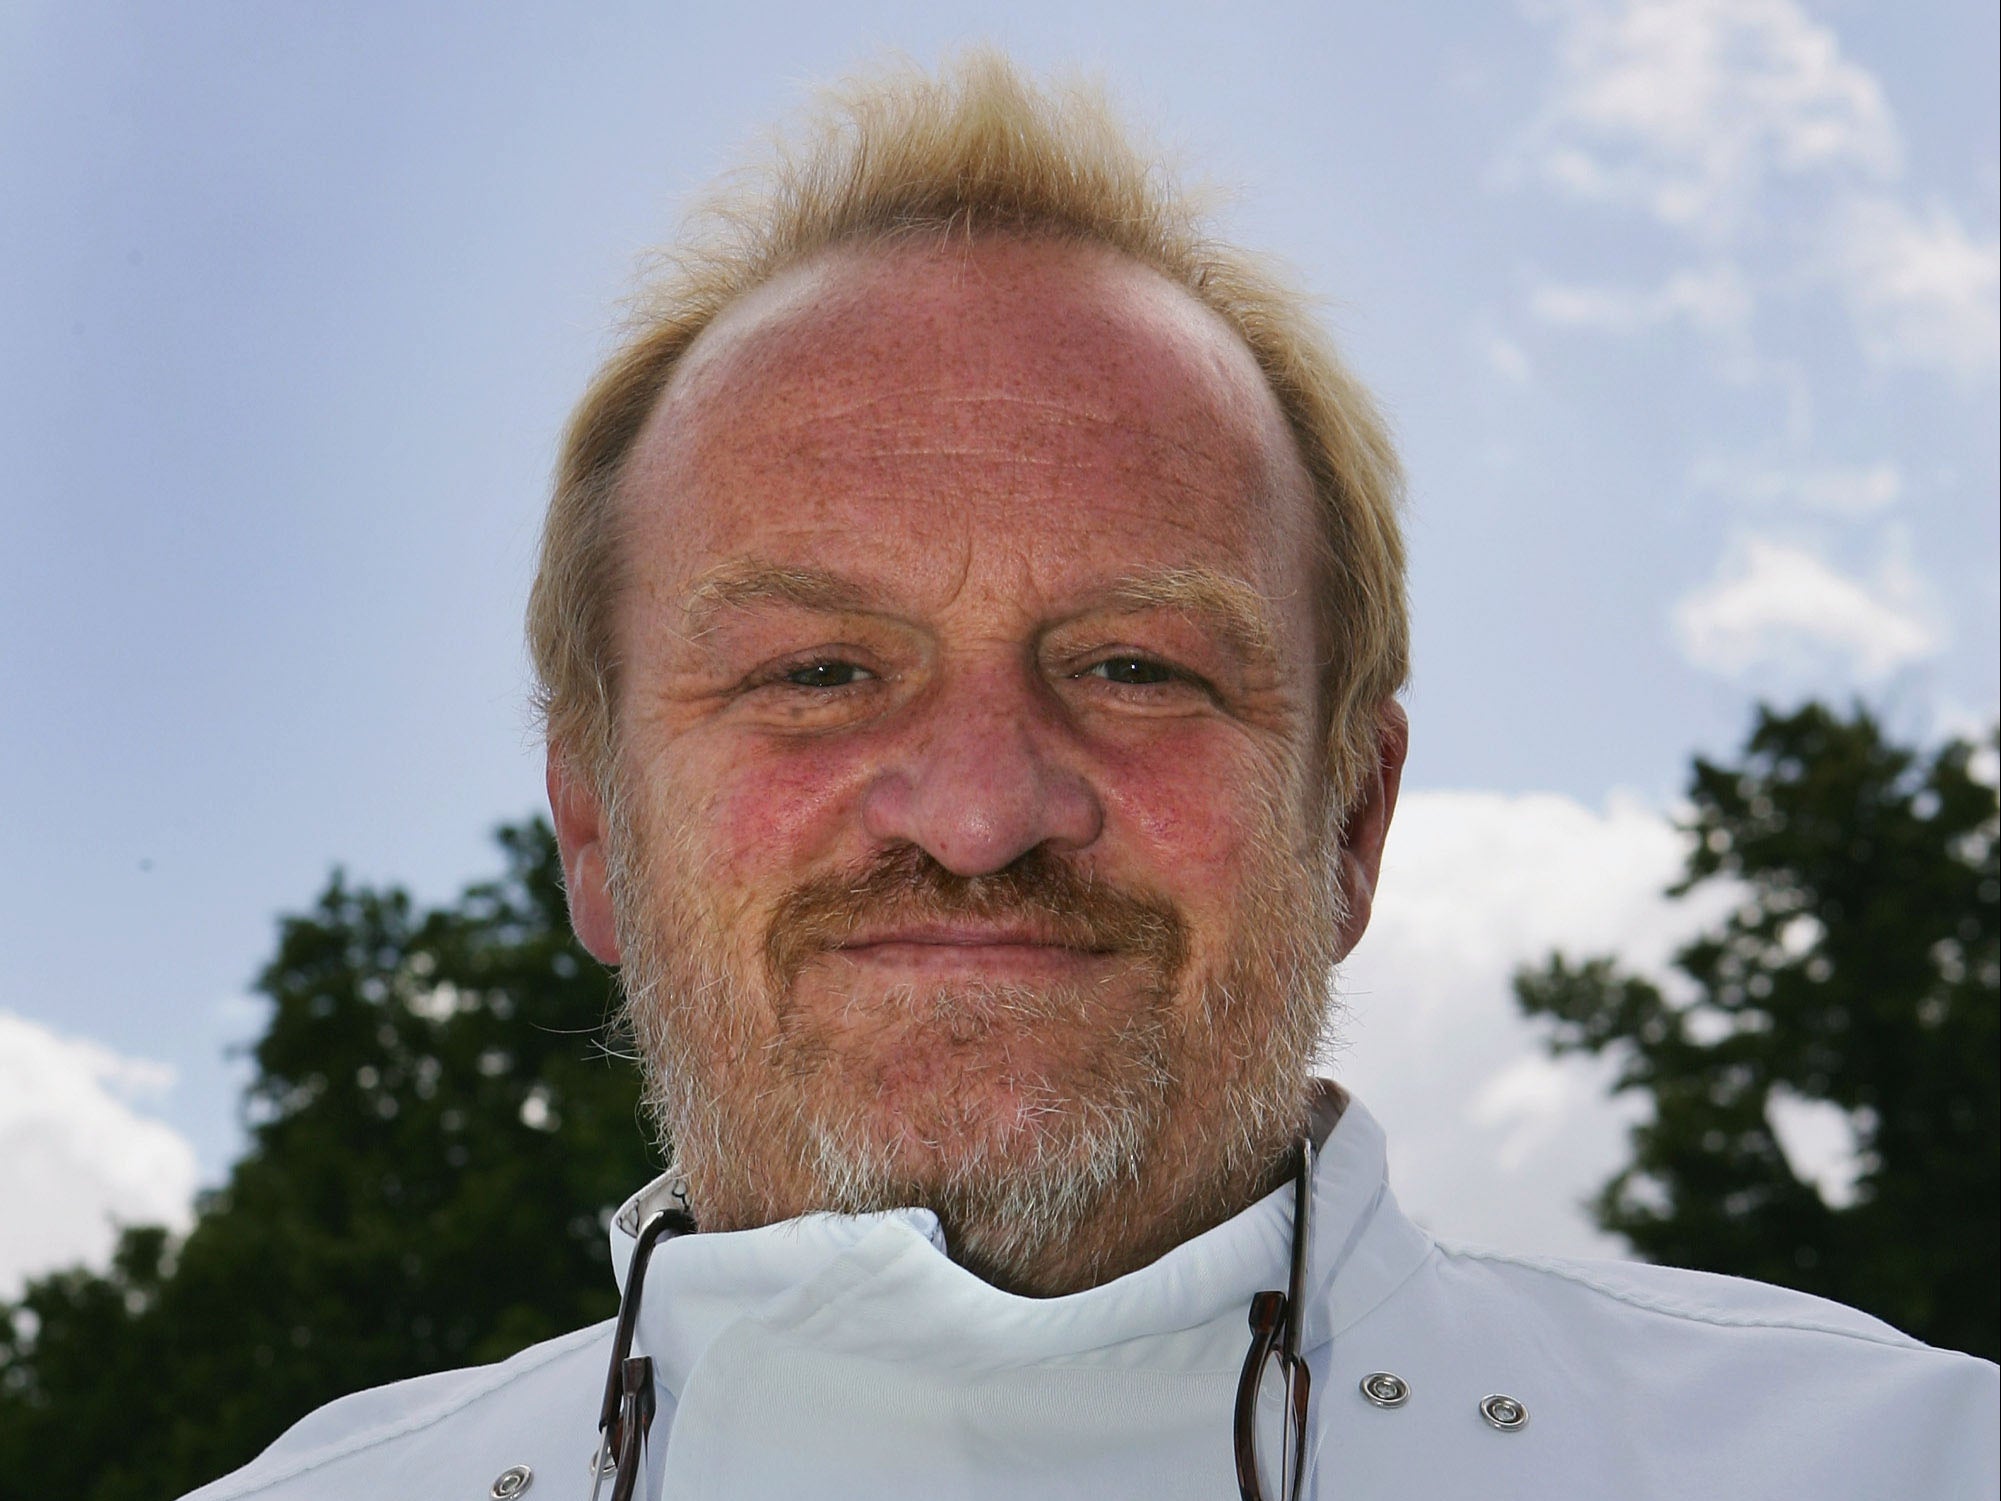 Antony Worrall Thompson clarifies he’s not an anti-vaxxer after sign in his pub welcomes unvaccinated